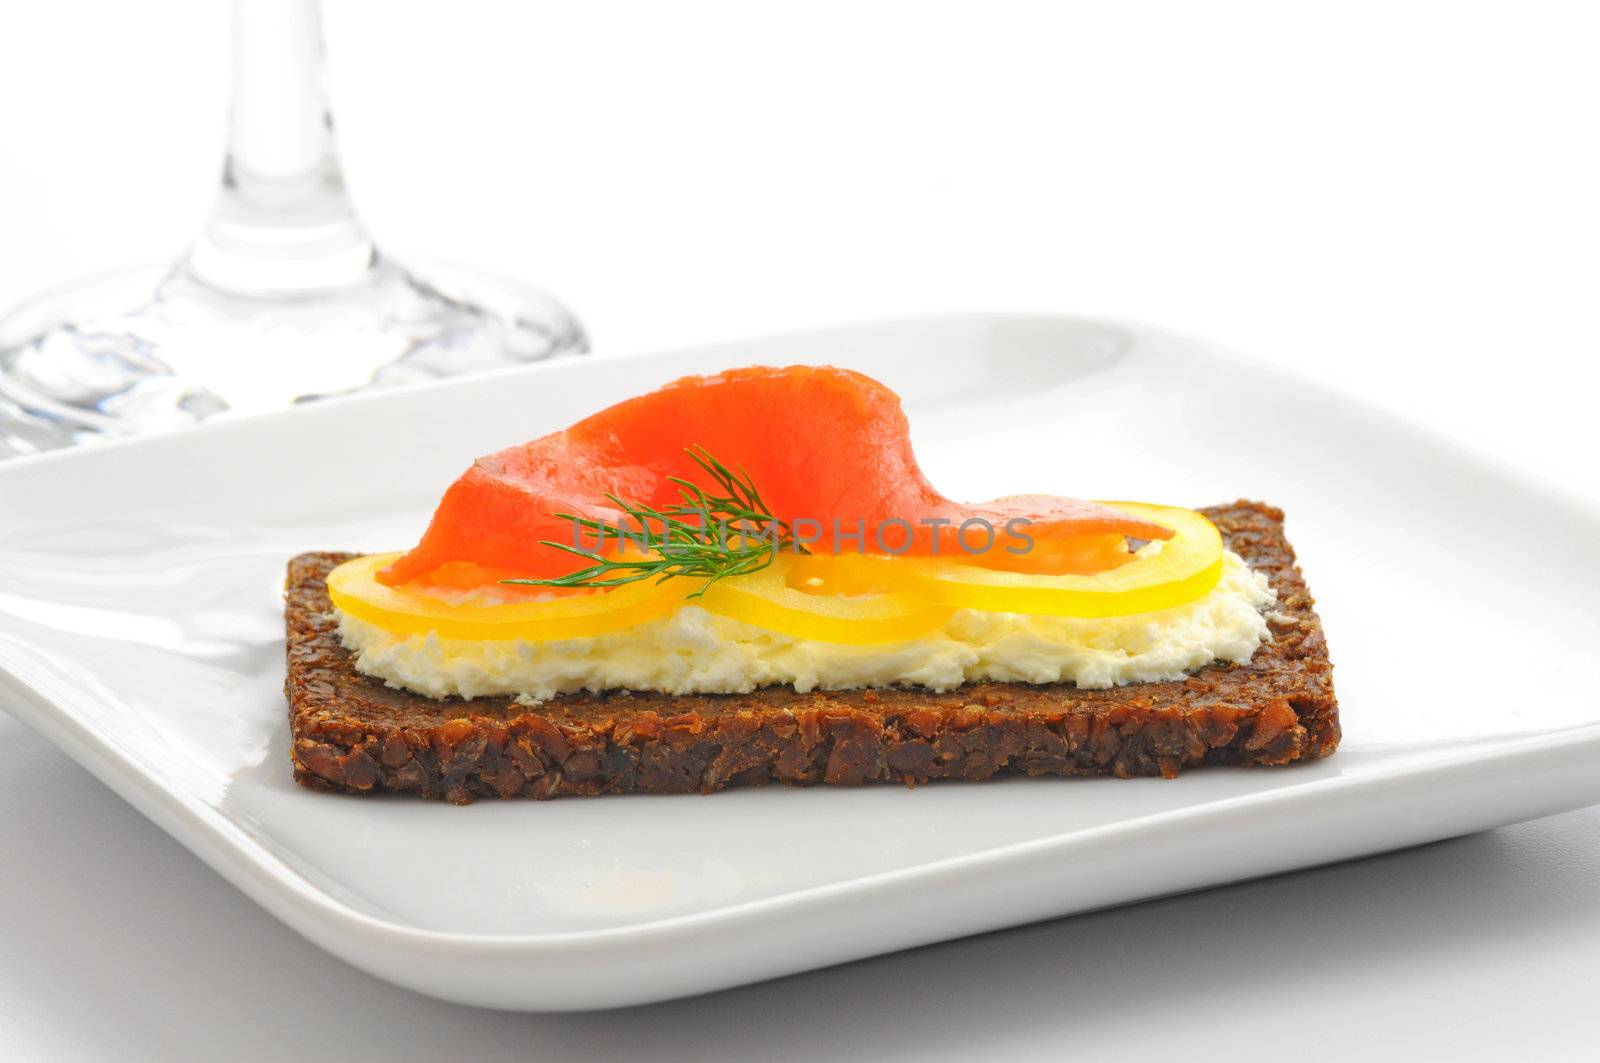 Appetizer of smoked salmon, cream cheese and dill.